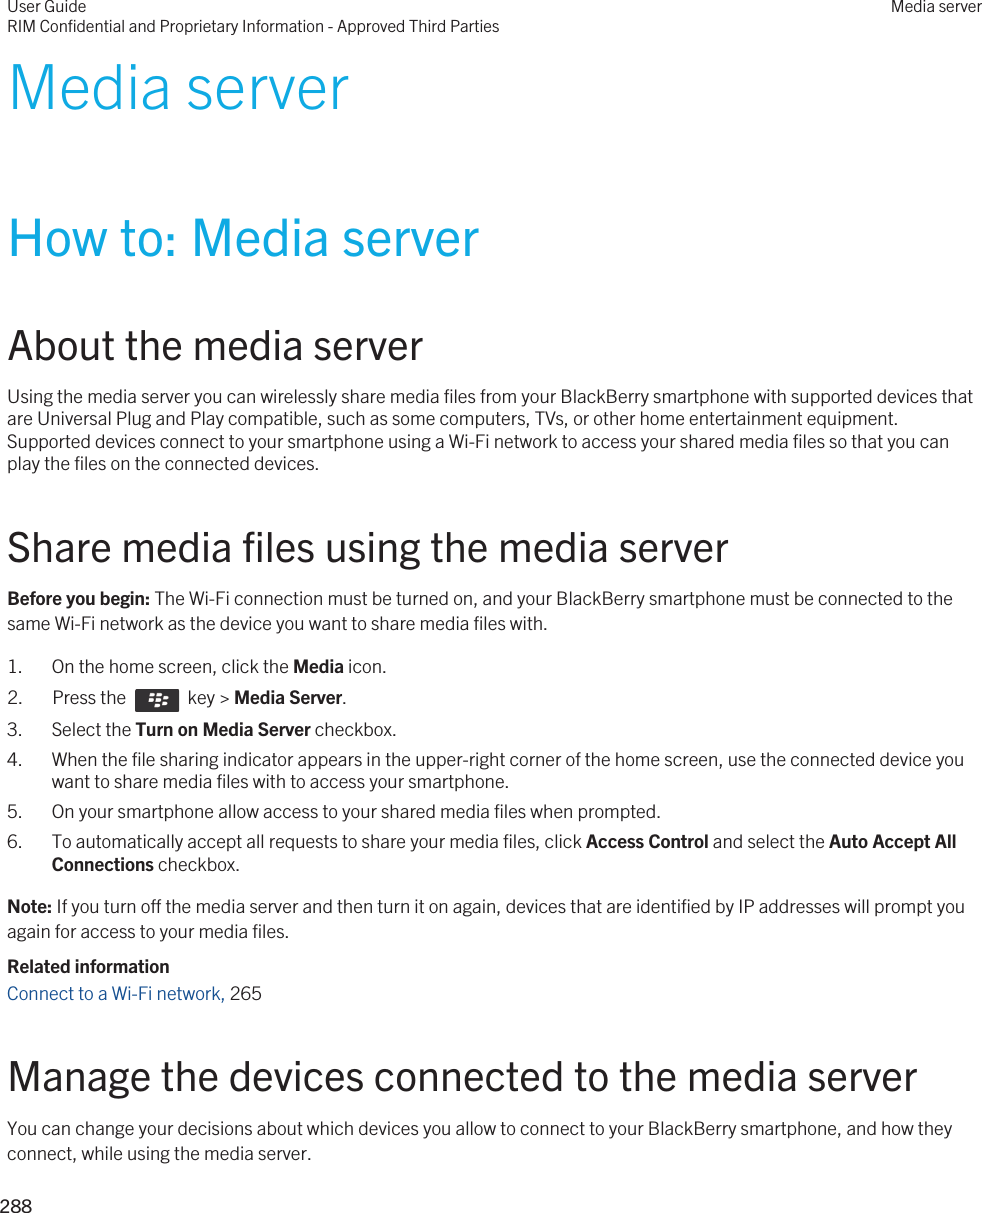 Media serverHow to: Media serverAbout the media serverUsing the media server you can wirelessly share media files from your BlackBerry smartphone with supported devices that are Universal Plug and Play compatible, such as some computers, TVs, or other home entertainment equipment. Supported devices connect to your smartphone using a Wi-Fi network to access your shared media files so that you can play the files on the connected devices.Share media files using the media serverBefore you begin: The Wi-Fi connection must be turned on, and your BlackBerry smartphone must be connected to the same Wi-Fi network as the device you want to share media files with.1. On the home screen, click the Media icon.2.  Press the    key &gt; Media Server.3. Select the Turn on Media Server checkbox.4. When the file sharing indicator appears in the upper-right corner of the home screen, use the connected device you want to share media files with to access your smartphone.5. On your smartphone allow access to your shared media files when prompted.6. To automatically accept all requests to share your media files, click Access Control and select the Auto Accept All Connections checkbox.Note: If you turn off the media server and then turn it on again, devices that are identified by IP addresses will prompt you again for access to your media files.Related informationConnect to a Wi-Fi network, 265 Manage the devices connected to the media serverYou can change your decisions about which devices you allow to connect to your BlackBerry smartphone, and how they connect, while using the media server.User GuideRIM Confidential and Proprietary Information - Approved Third PartiesMedia server288 